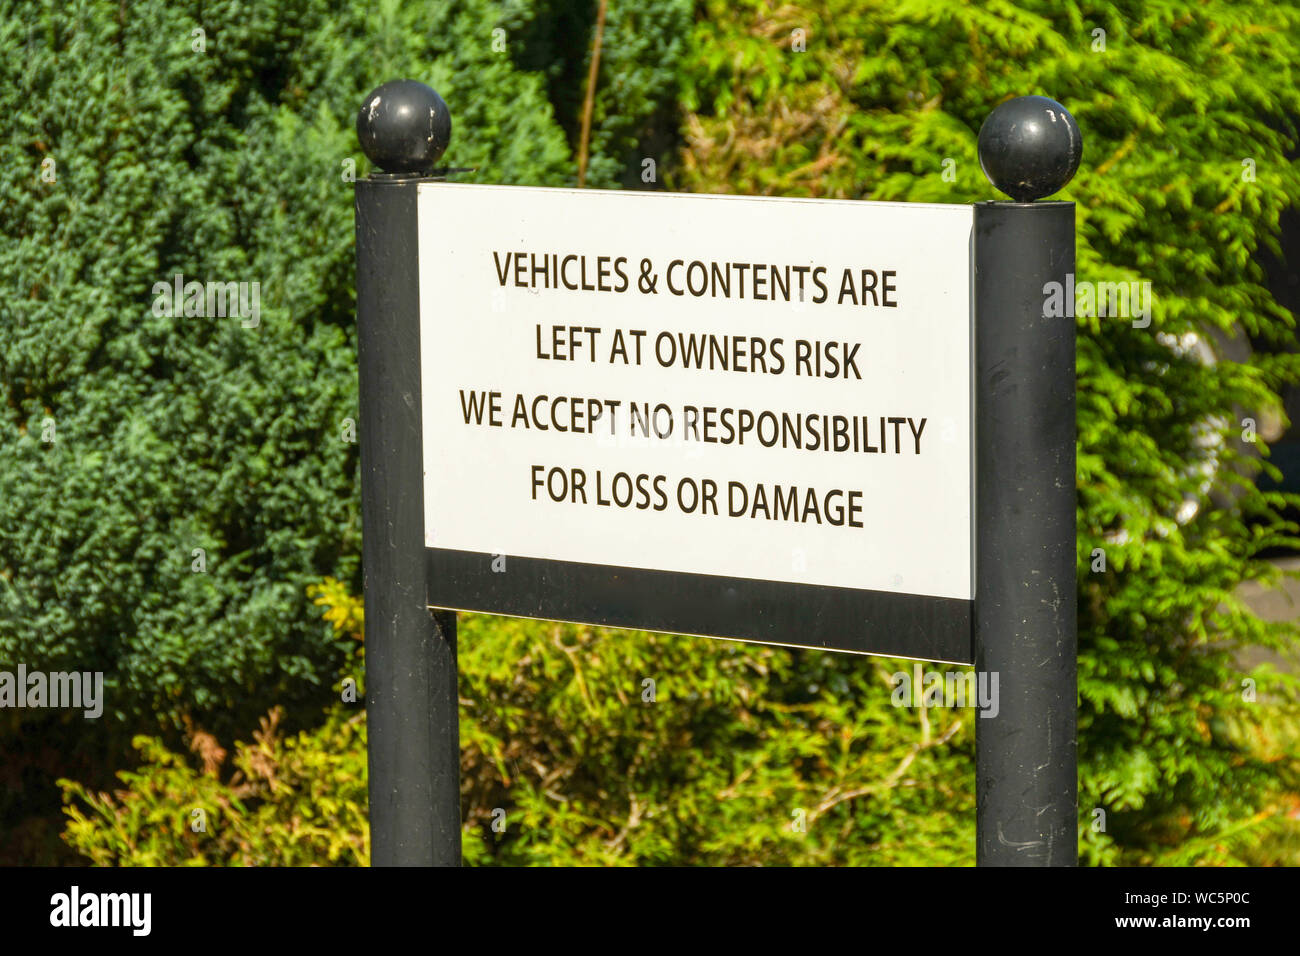 Notice warning drivers that the premises takes no responsibility for theft or loss from parked vehicles Stock Photo